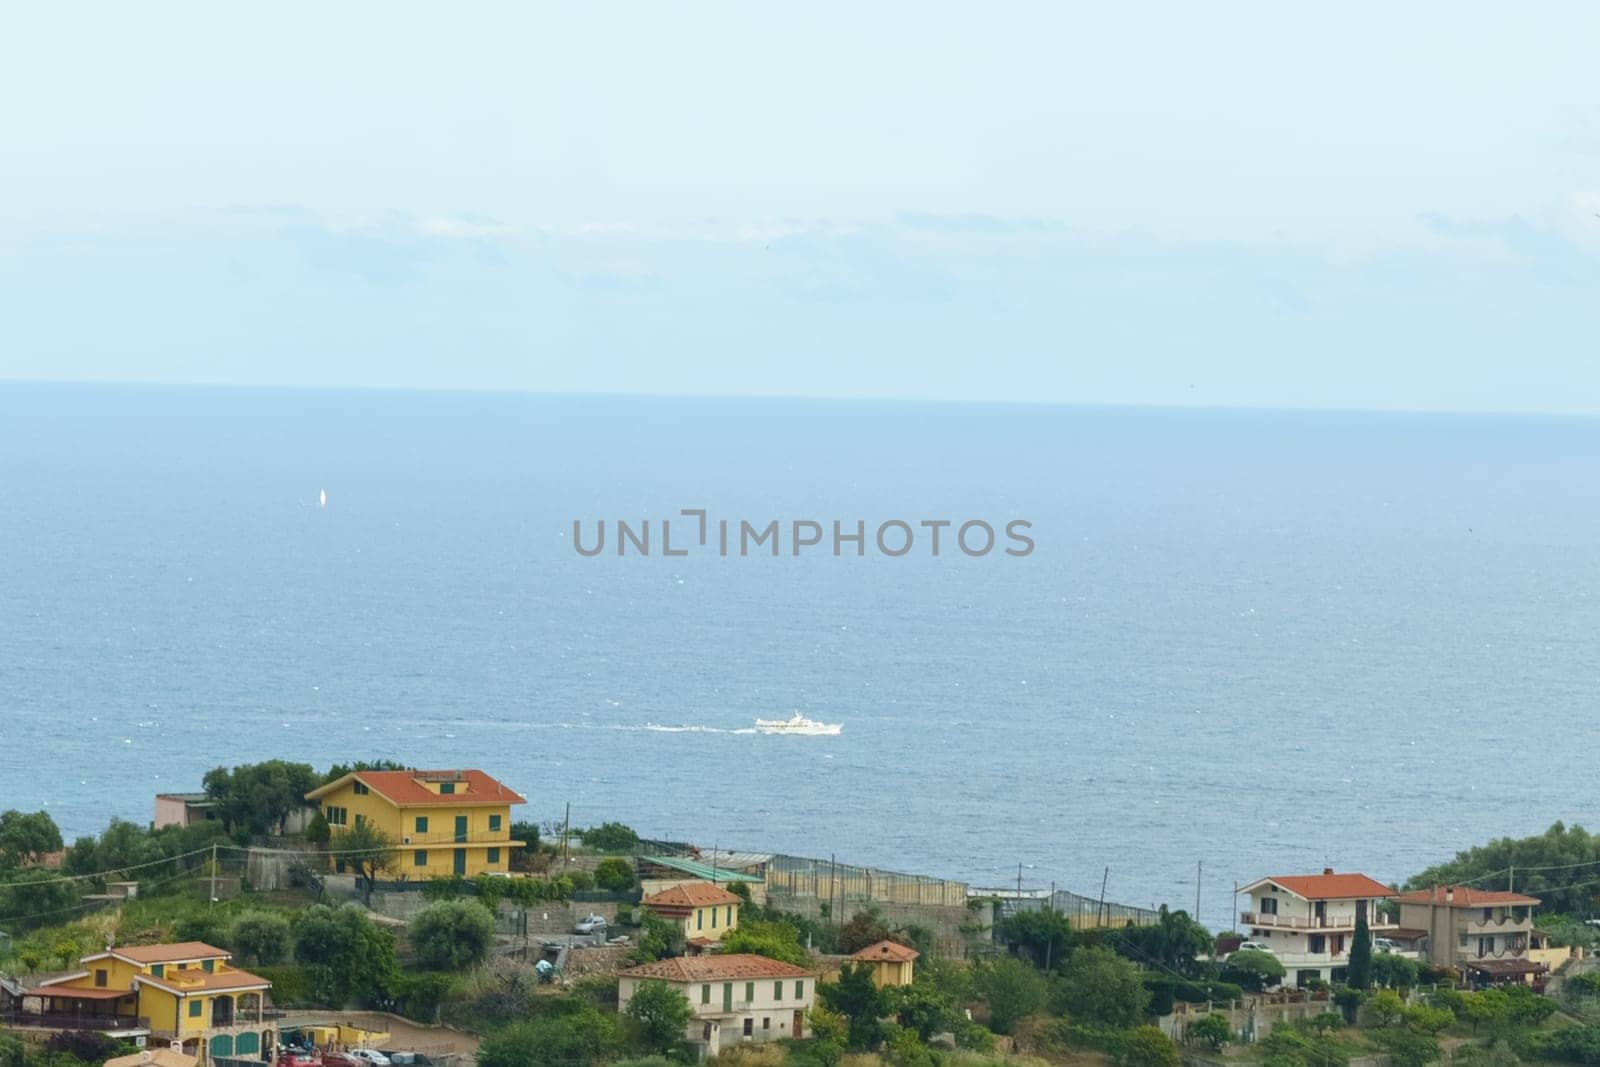 A view from a hill shows a body of water stretching into the distance, surrounded by lush greenery. The sunlight reflects off the water, creating a serene scene. Coast, Ligurian Sea